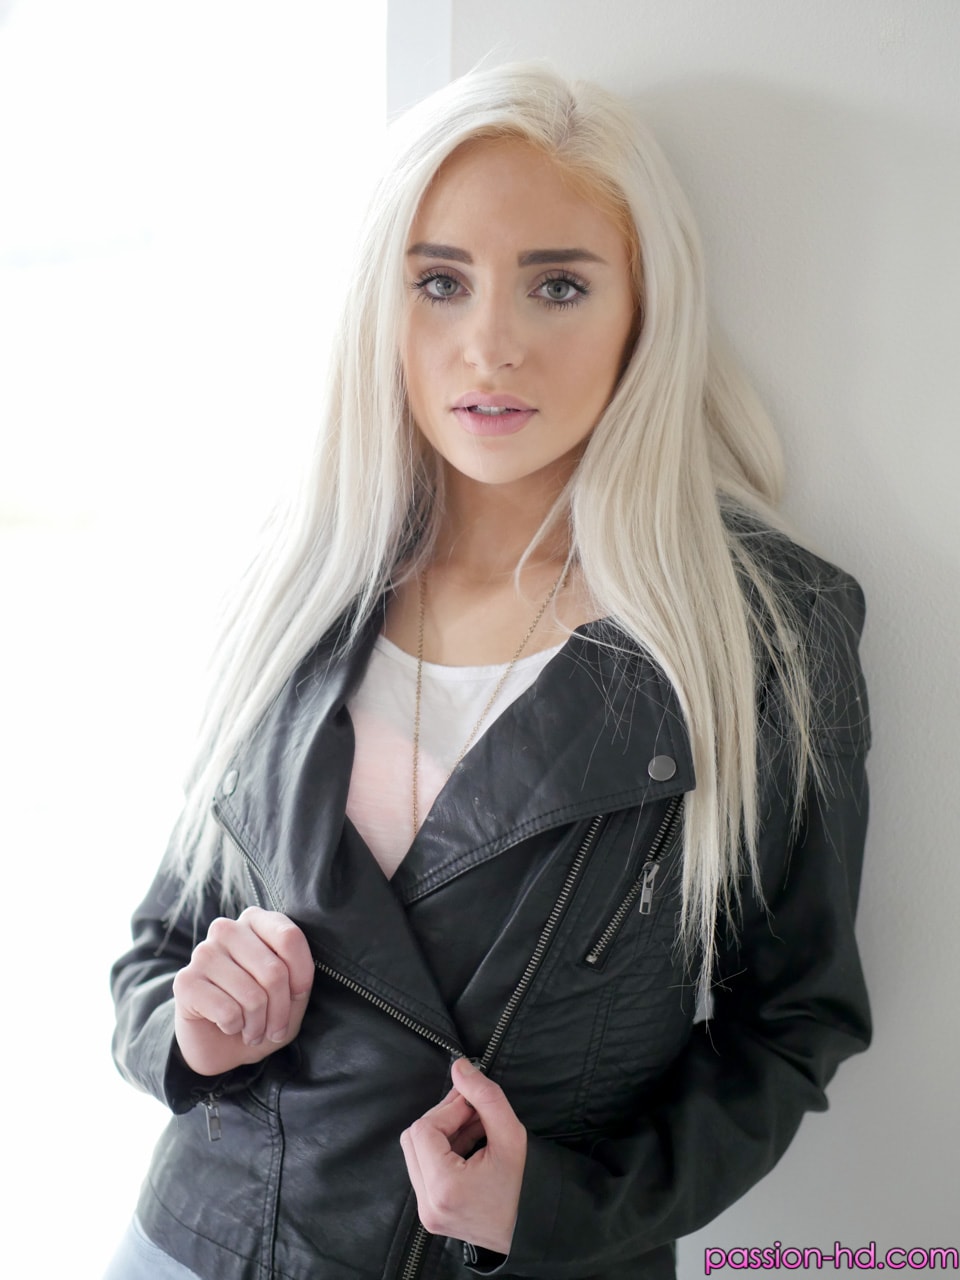 Passion HD 'Bewitching Blonde Babe' starring Naomi Woods (Photo 16)